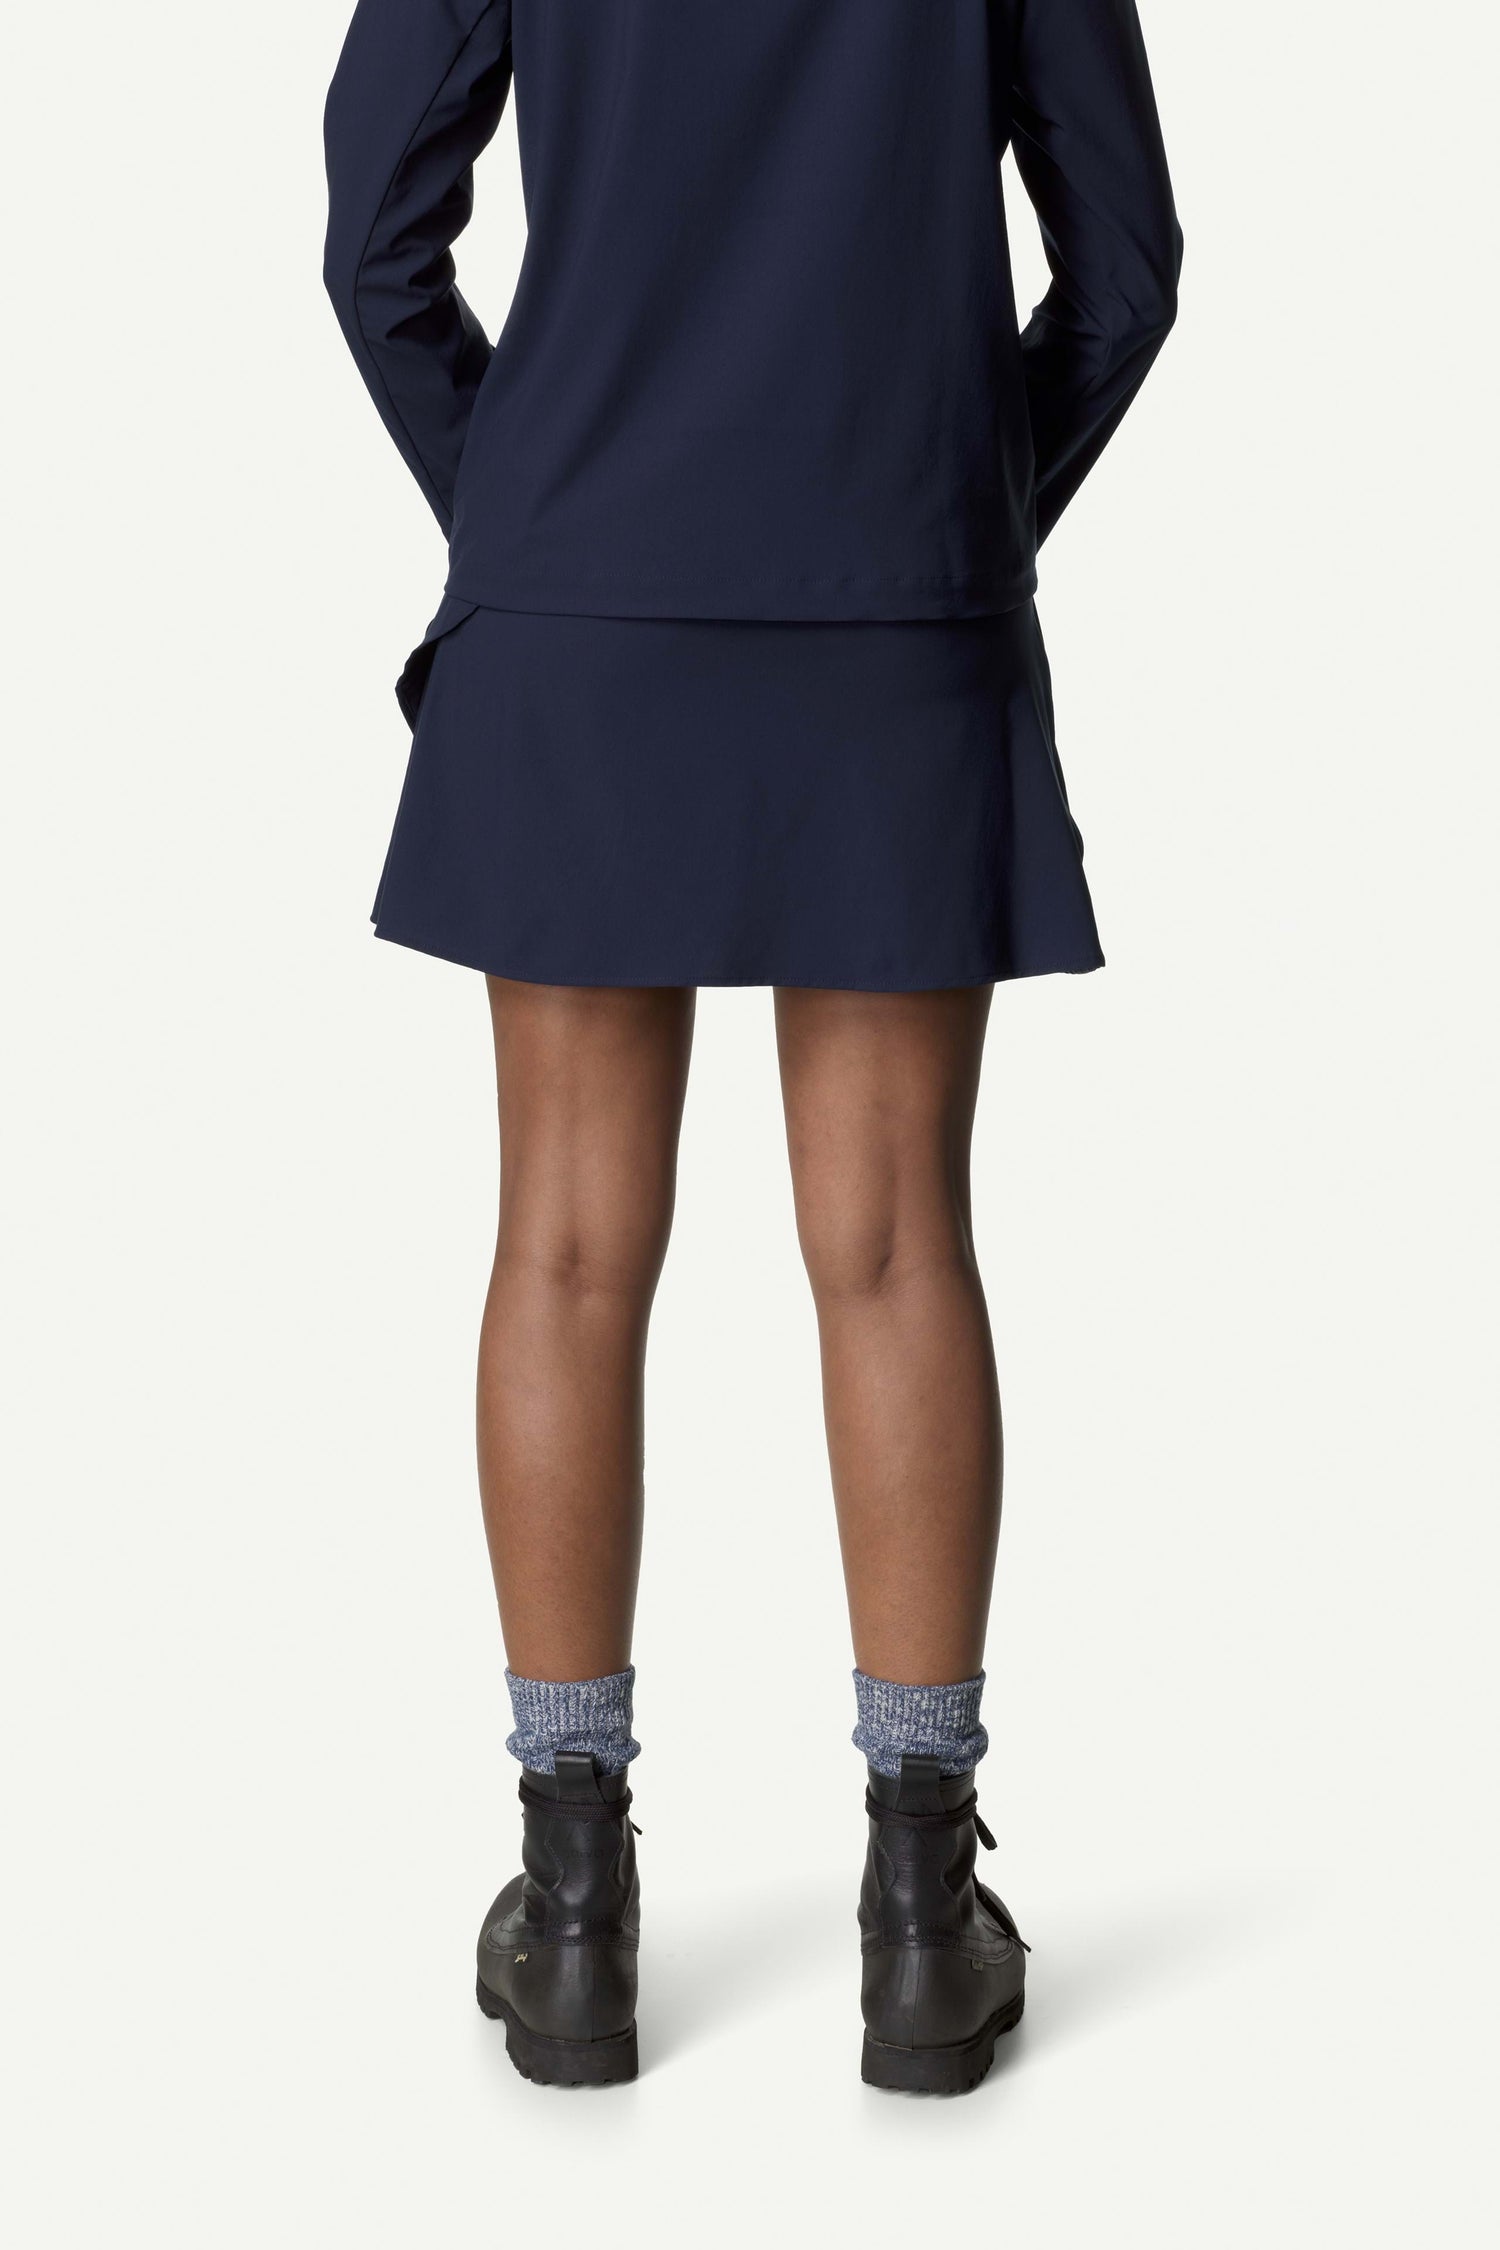 Houdini W's Skort - Recycled Polyester Blue Illusion Skirt